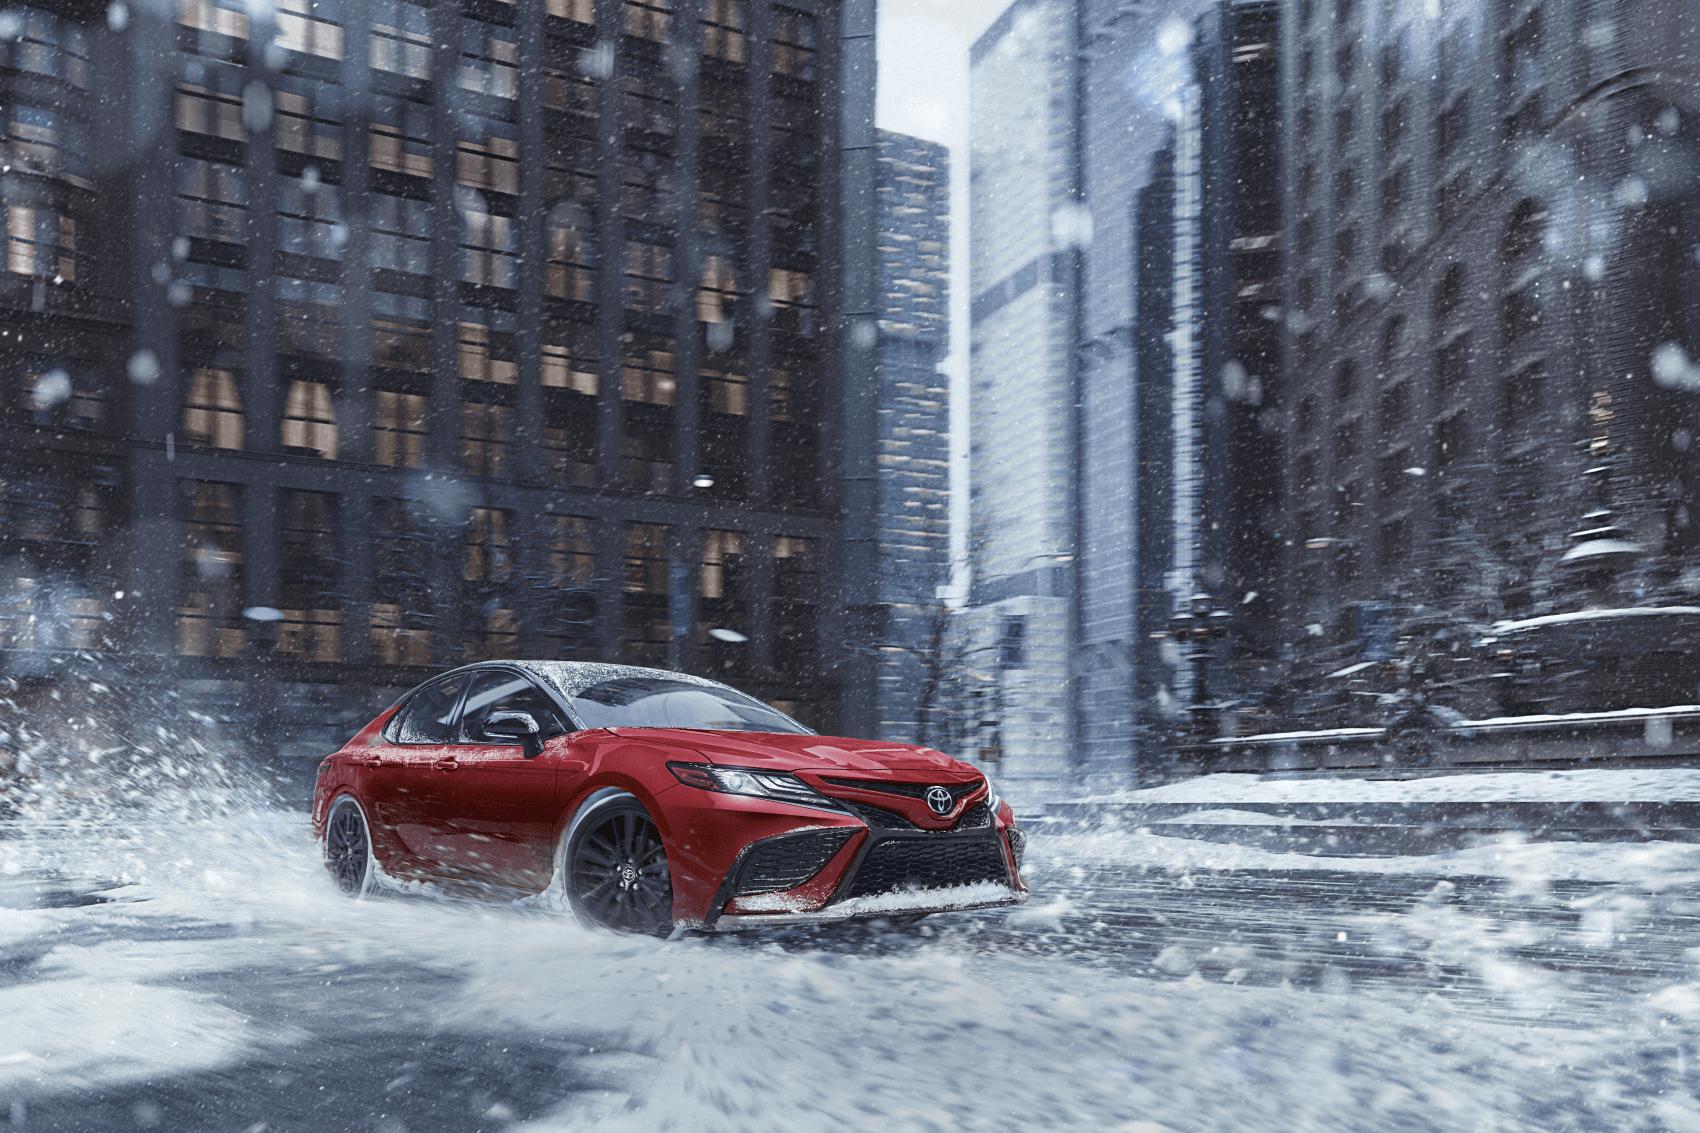 2021 Toyota Camry Red City Snow Winter